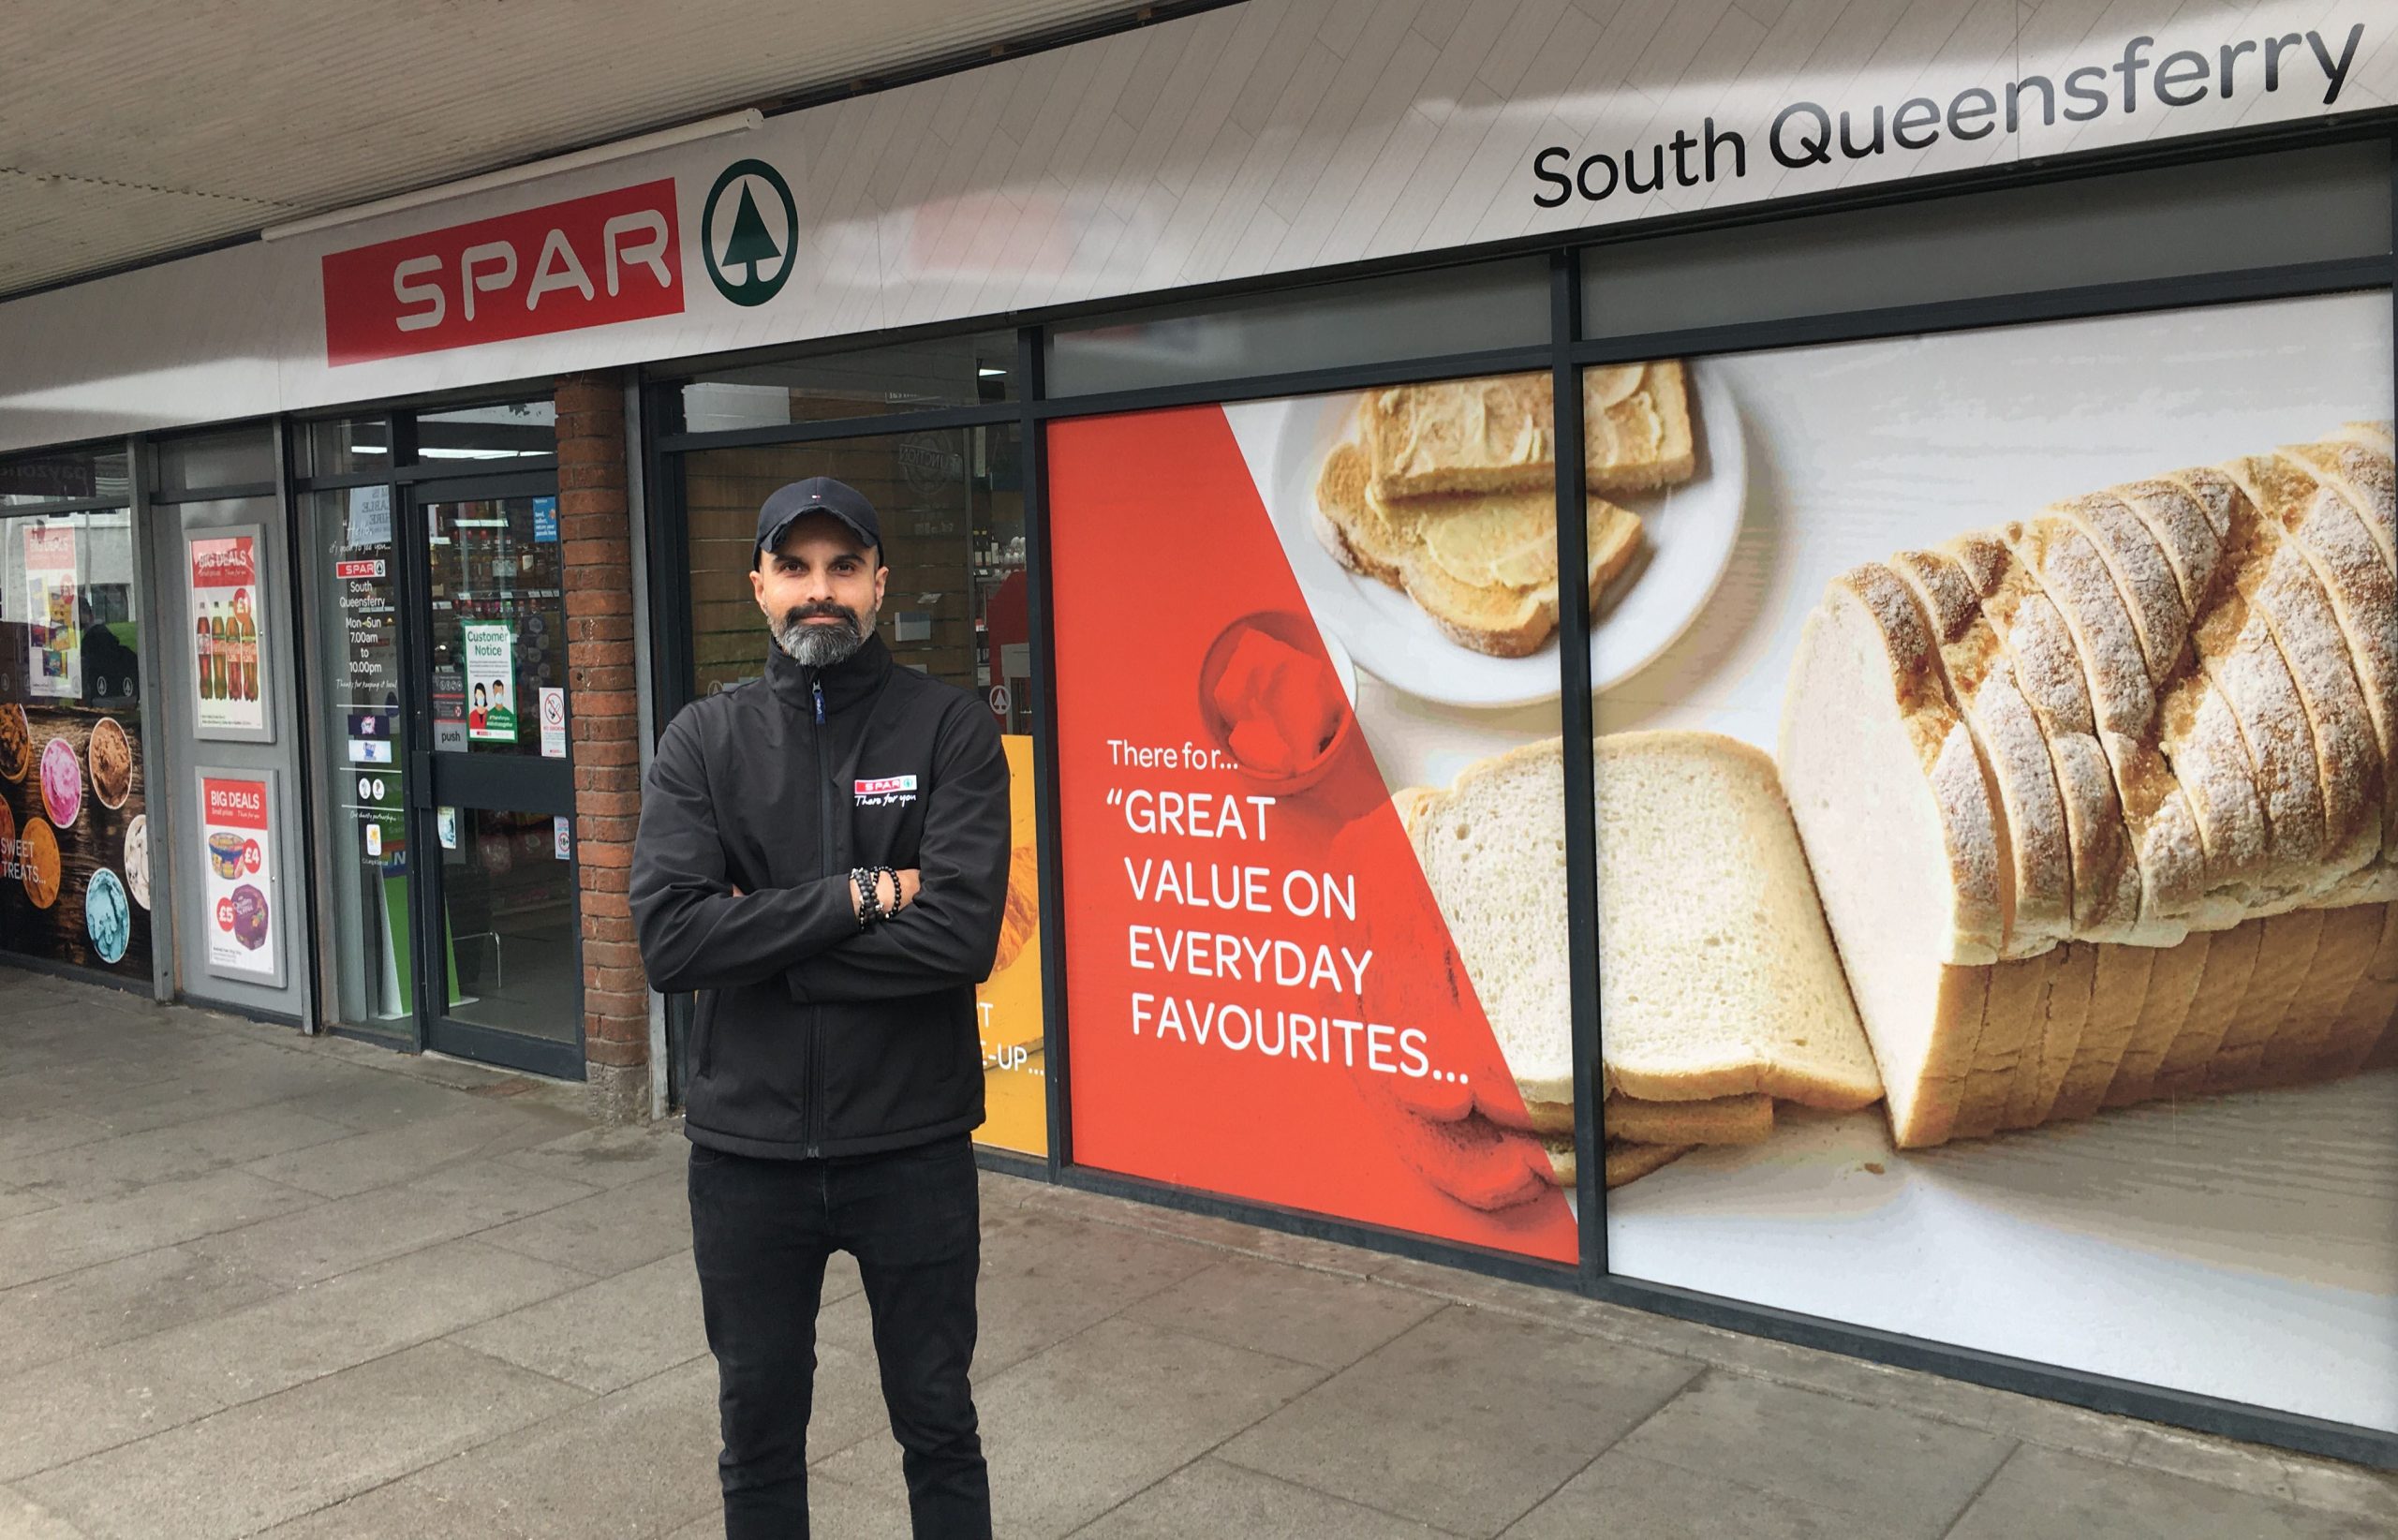 New SPAR store opens in South Queensferry in Edinburgh